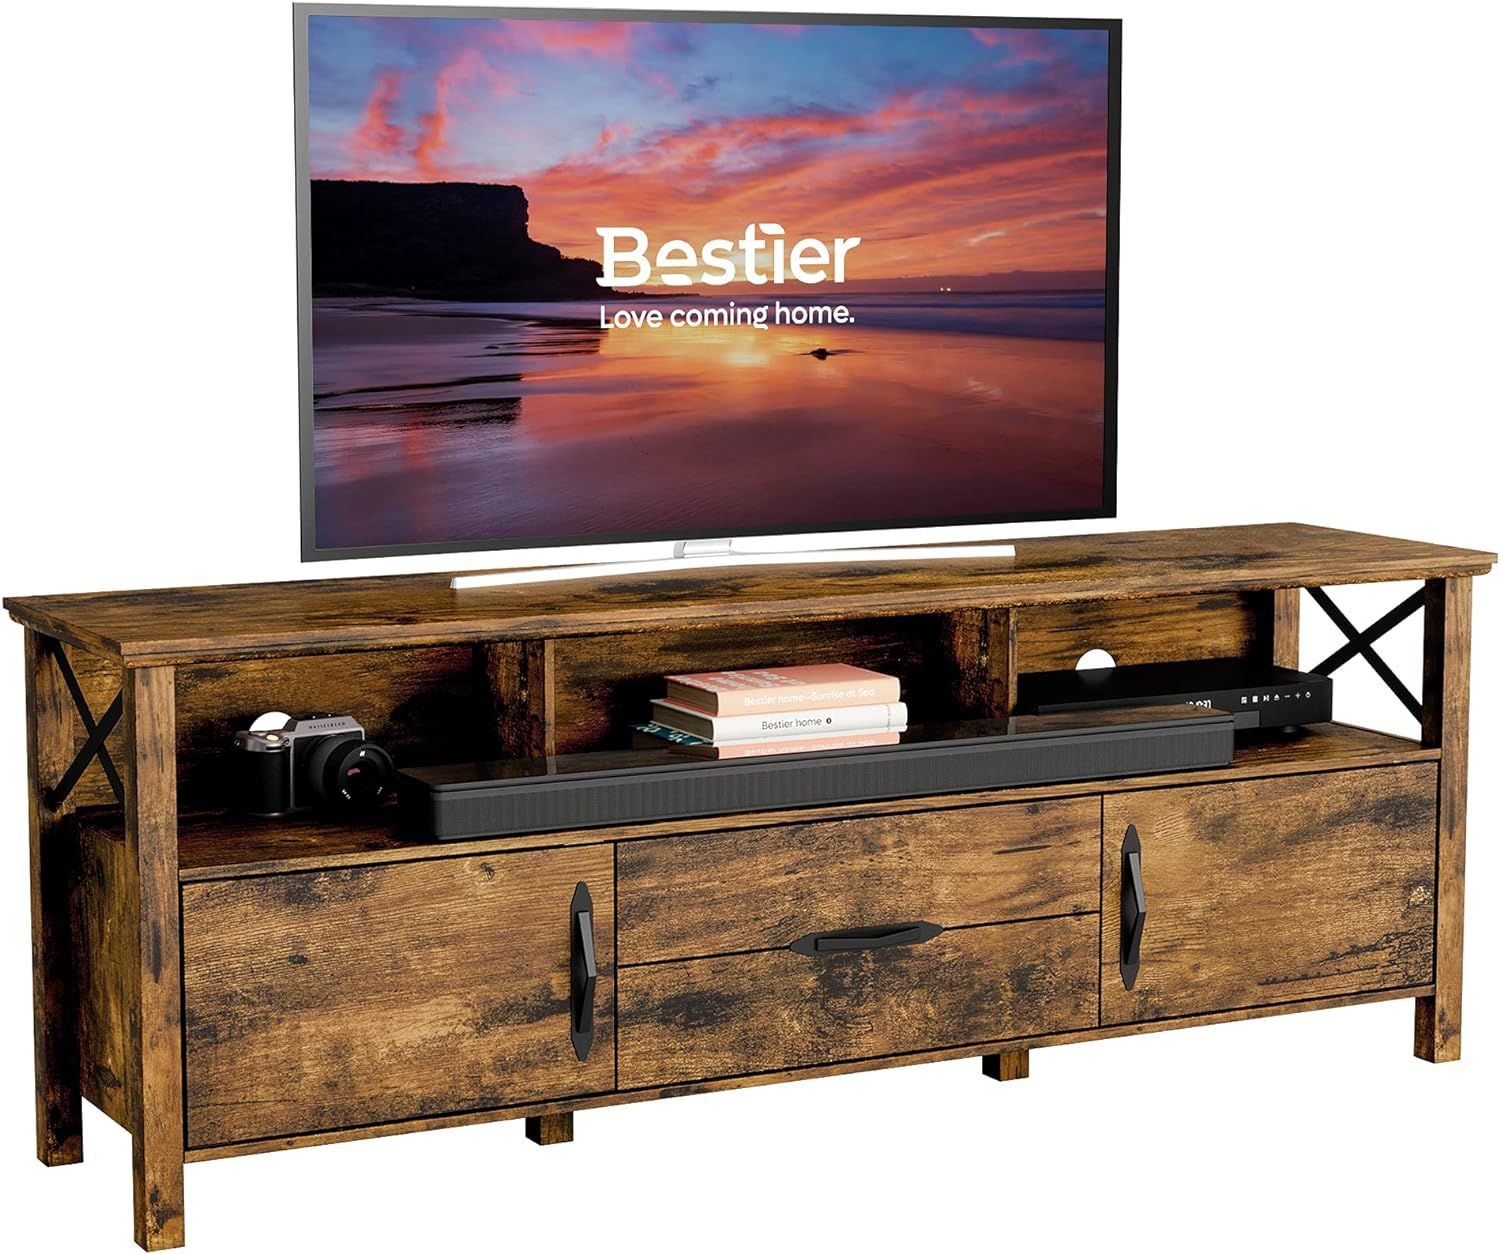 Bestier Tv Stand For Tv Up To 75 Inch, Farmhouse India | Ubuy In Bestier Tv Stand For Tvs Up To 75&quot; (Photo 14 of 15)